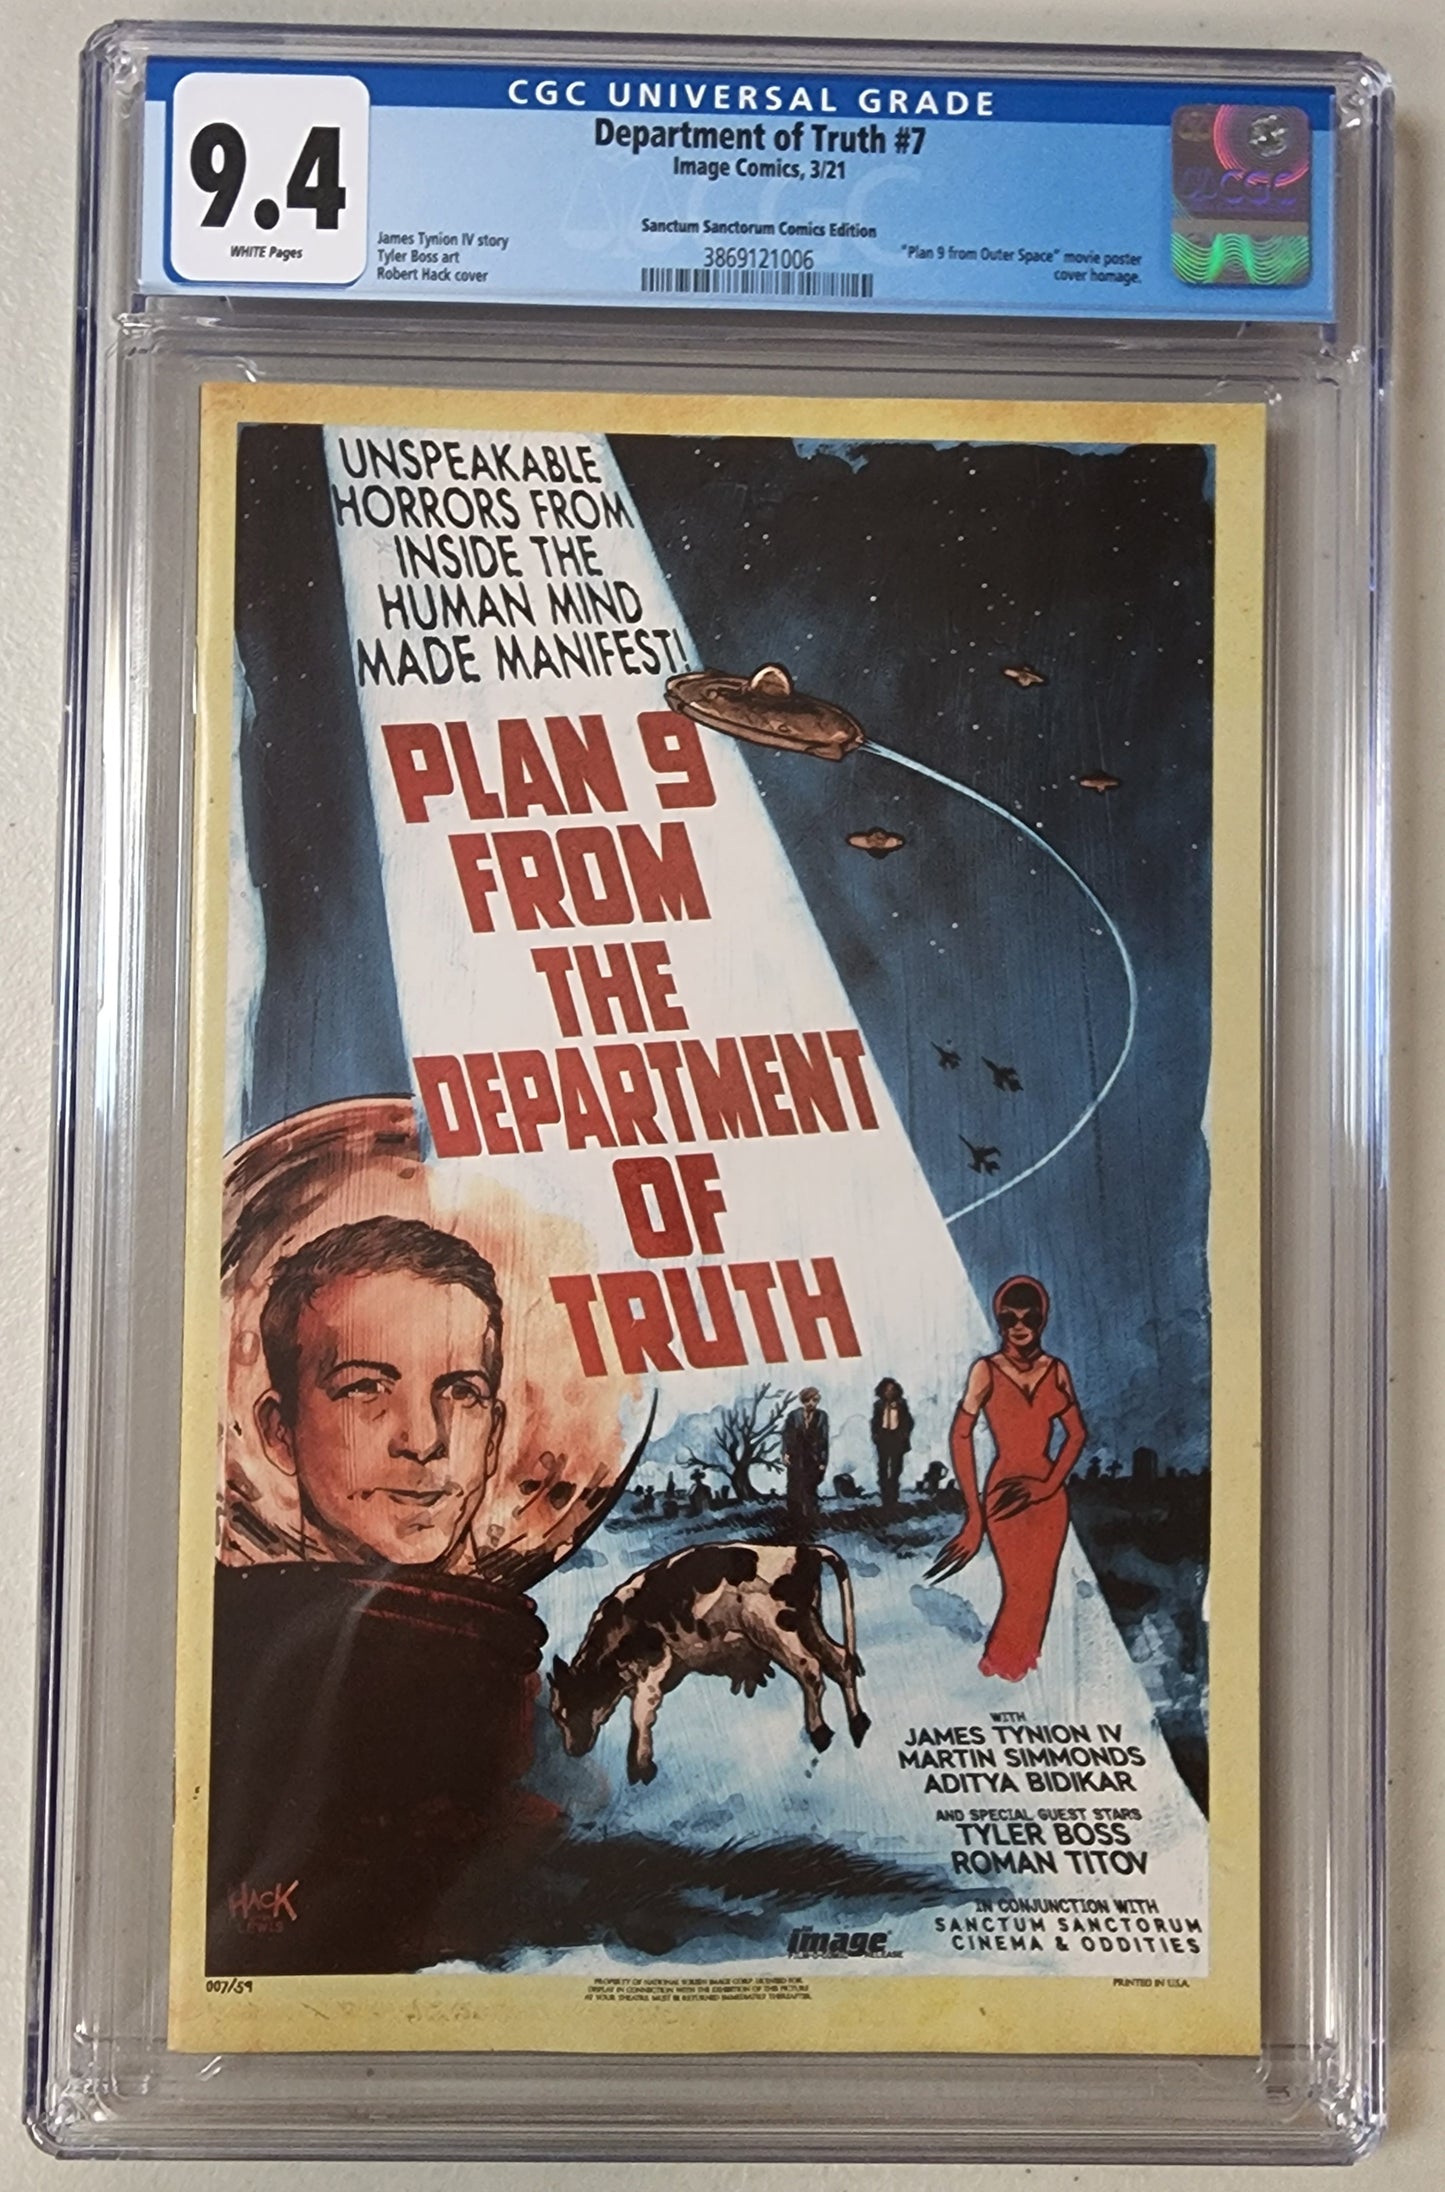 9.4 CGC DEPARTMENT OF TRUTH #7 SSCO HACK HOMAGE VARIANT [3869121006]